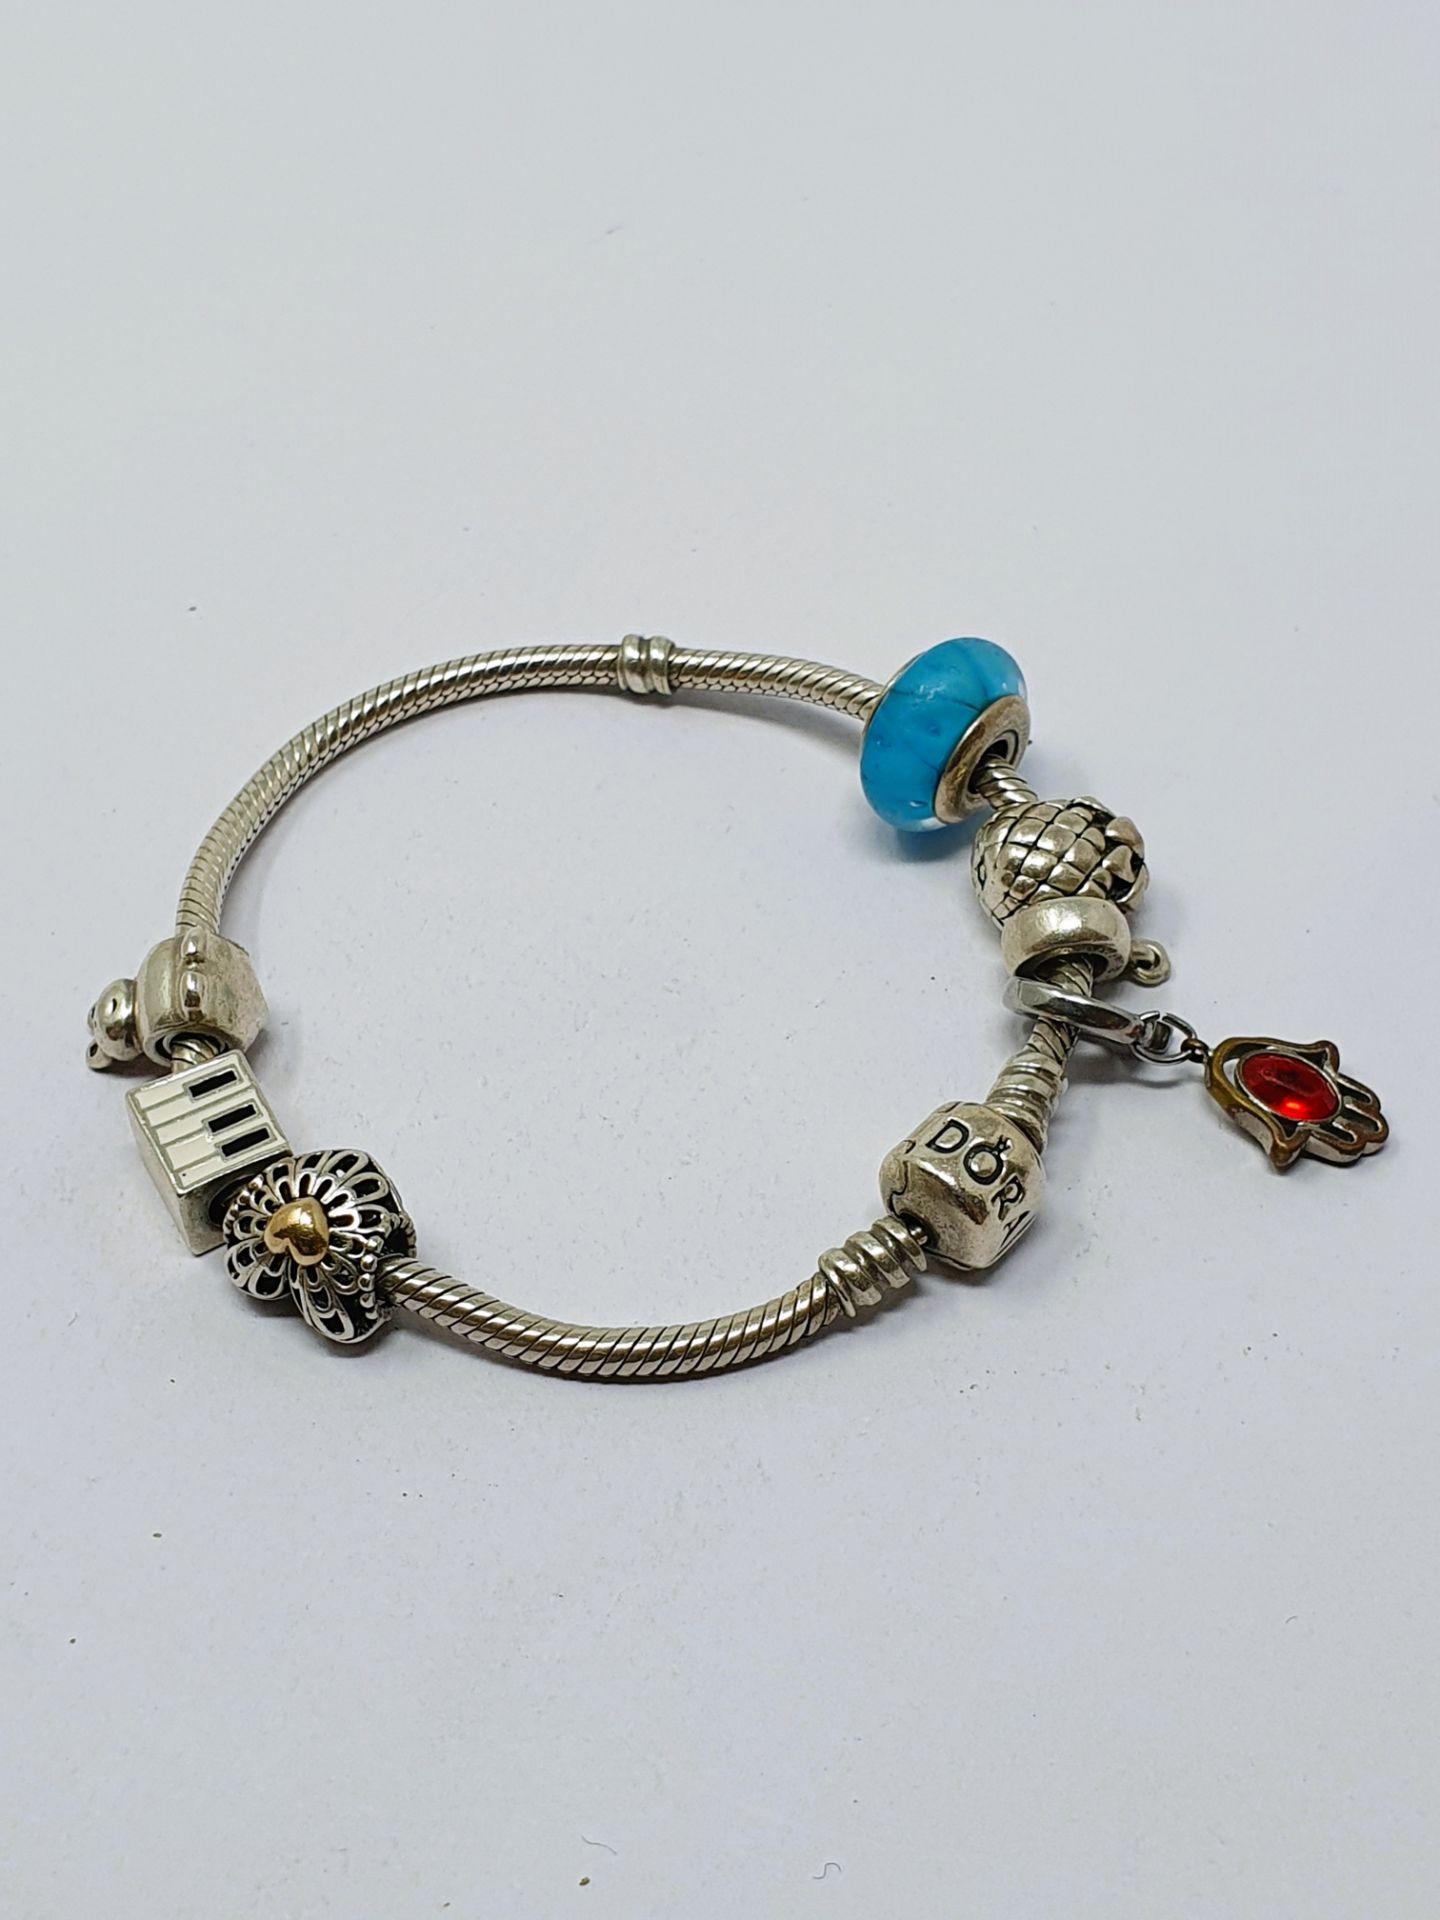 A Pandora silver bracelet with six charms; an assortment of Murano-style glass charm beads;